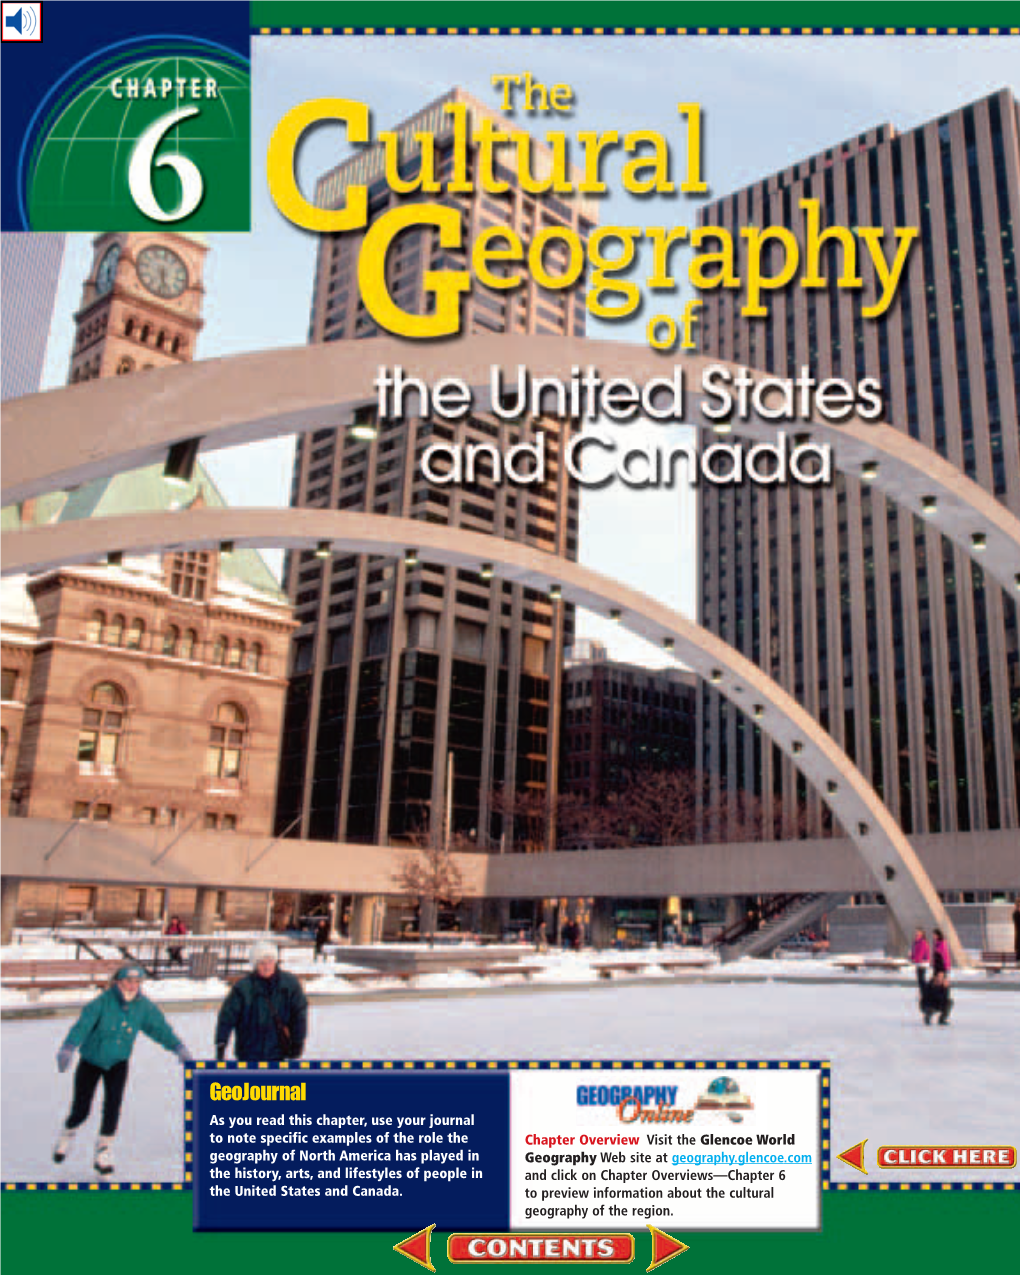 Chapter 6: the Cultural Geography of the United States and Canada